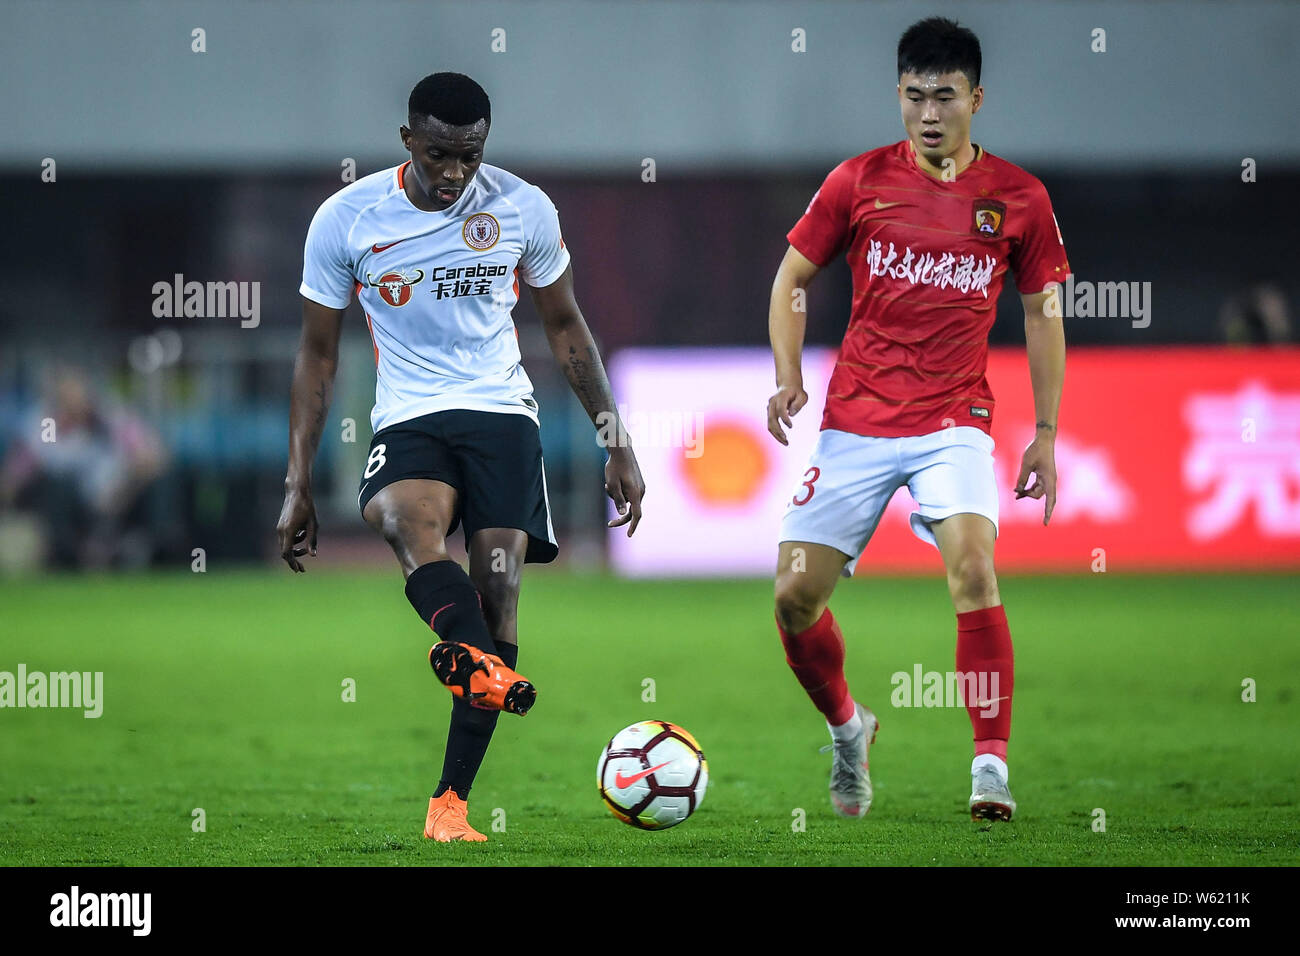 Cameroonian football player Benjamin Moukandjo, right, of Beijing Renhe passes the ball against a player of Guangzhou Evergrande Taobao in their 26th Stock Photo